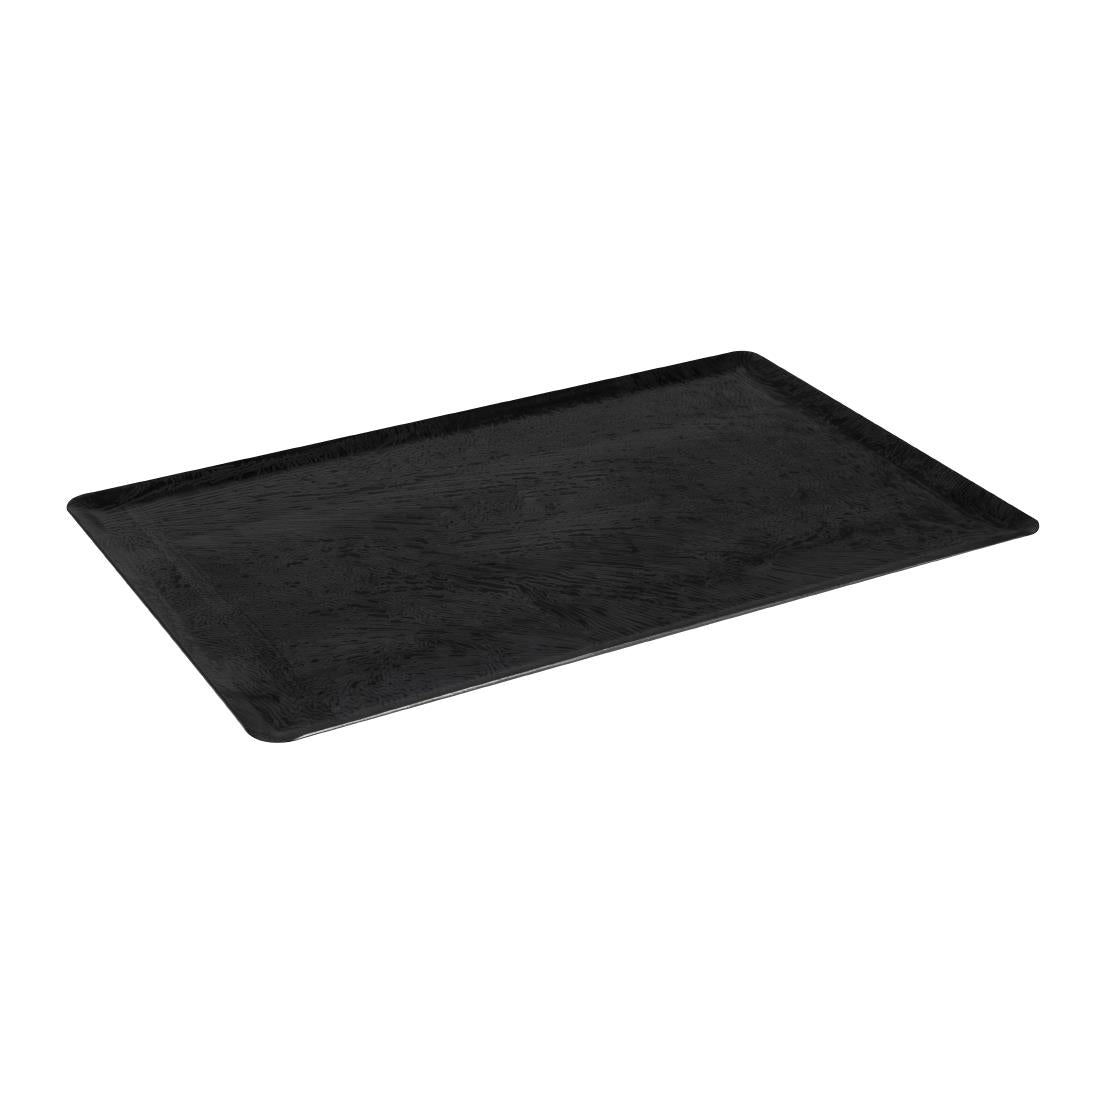 Bourgeat Blue Steel Baking Tray 530 x 325mm JD Catering Equipment Solutions Ltd